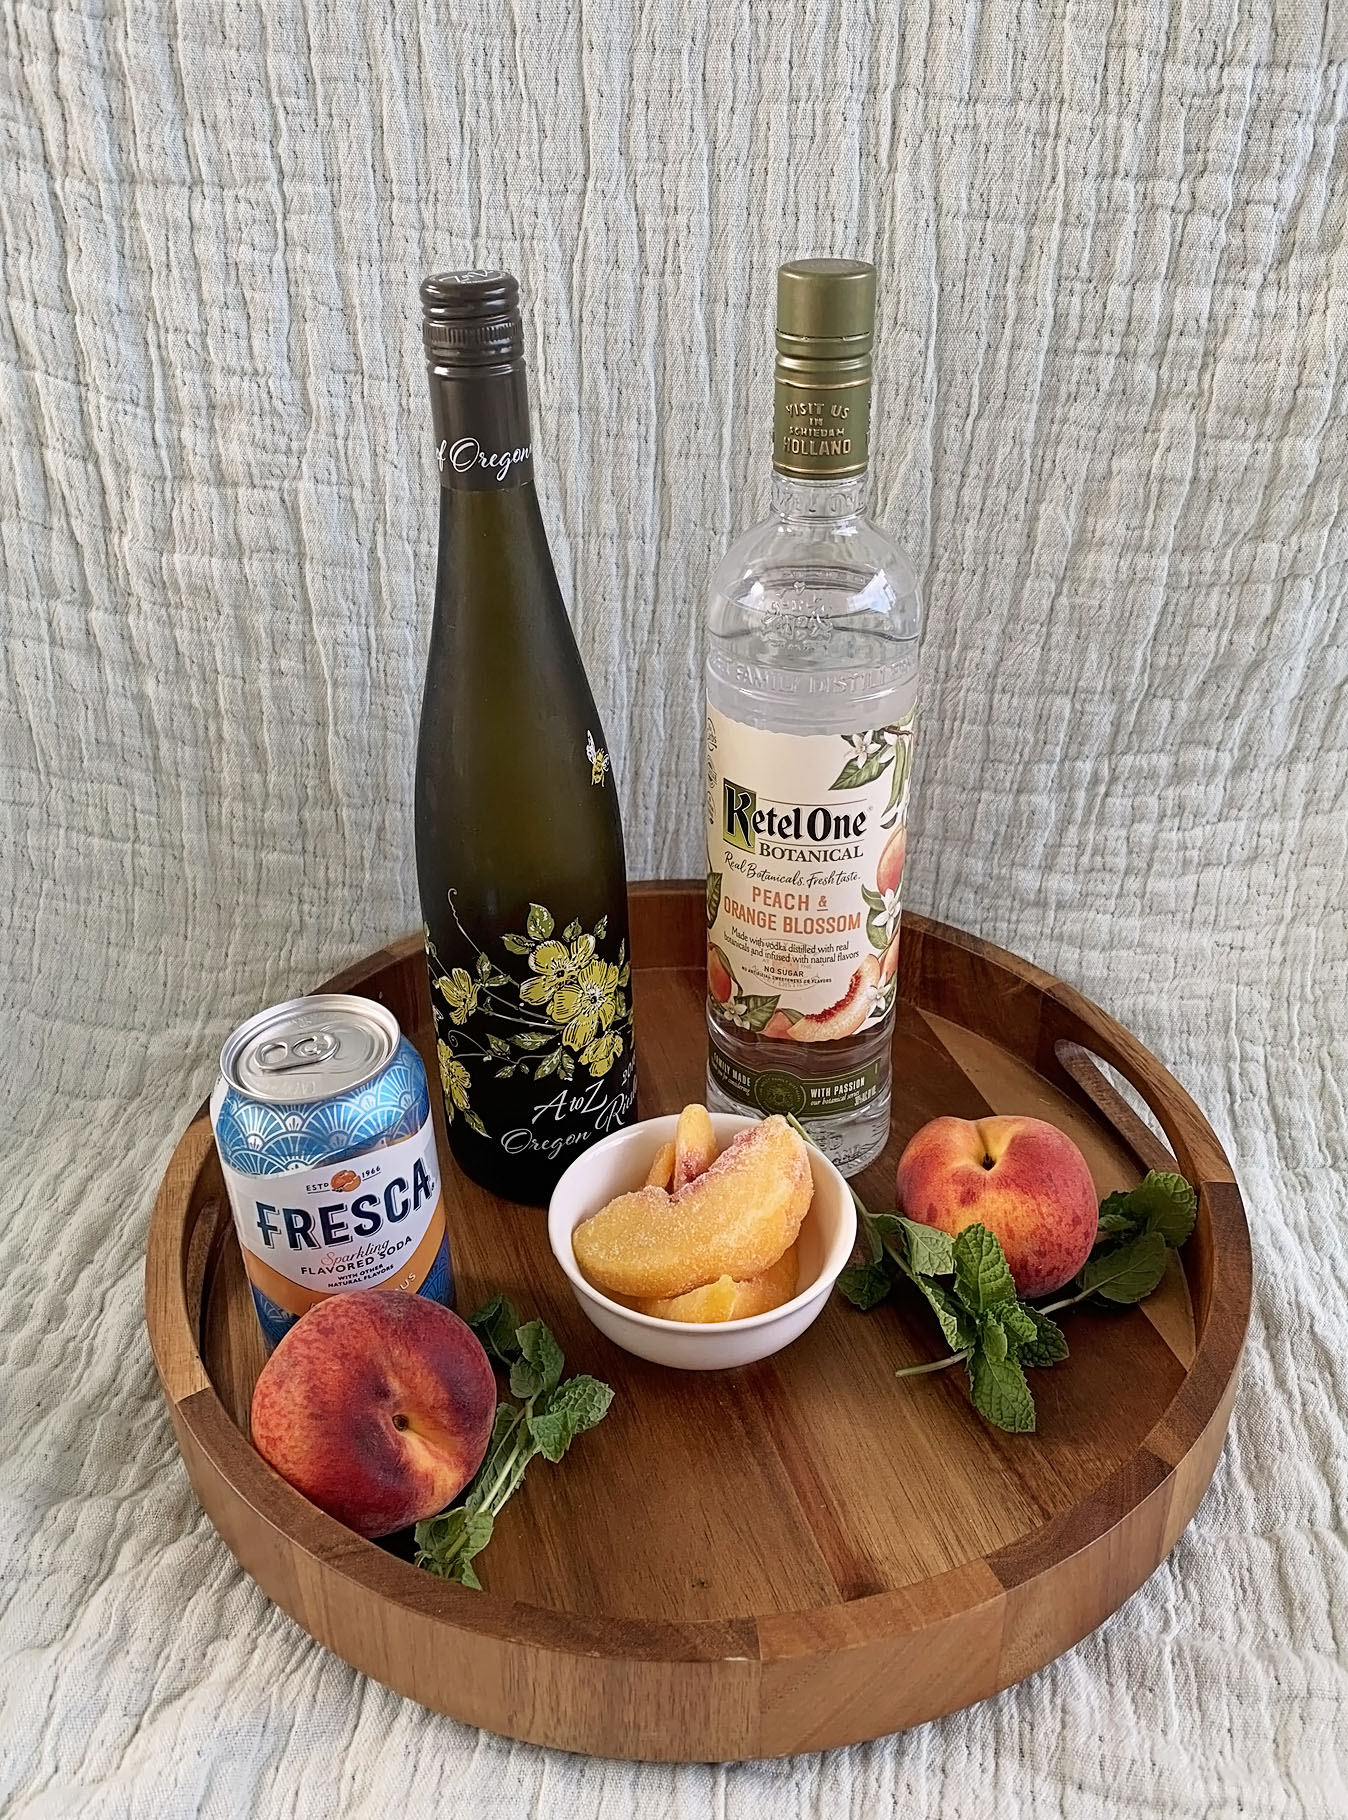 Ingredients of Peach and Orange Blossom Sangria including frozen sliced peaches, mint, peach and citrus soda, reisling, and peach and orange blossom voda.